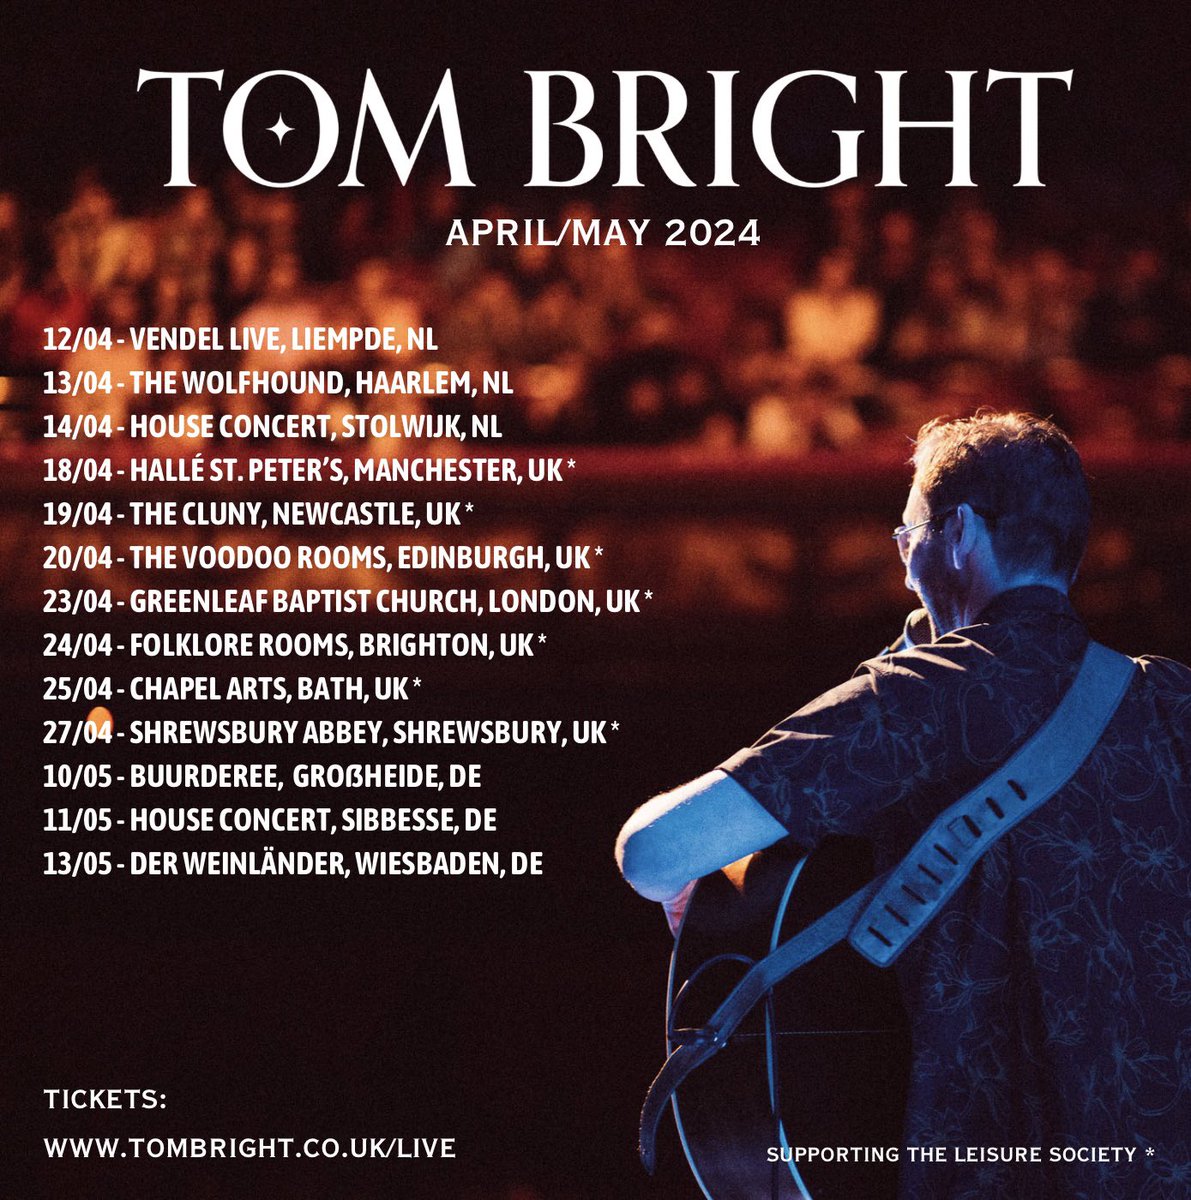 Kicking off a very busy springtime ☀️ so excited to be back in The Netherlands later this week, then onto UK tour with @LeisureSociety (*) next week and straight into some Germany show afterwards. All ticket links 👉🏼 linktr.ee/tombrightmusic 🎫🌼🇳🇱🇬🇧🇩🇪